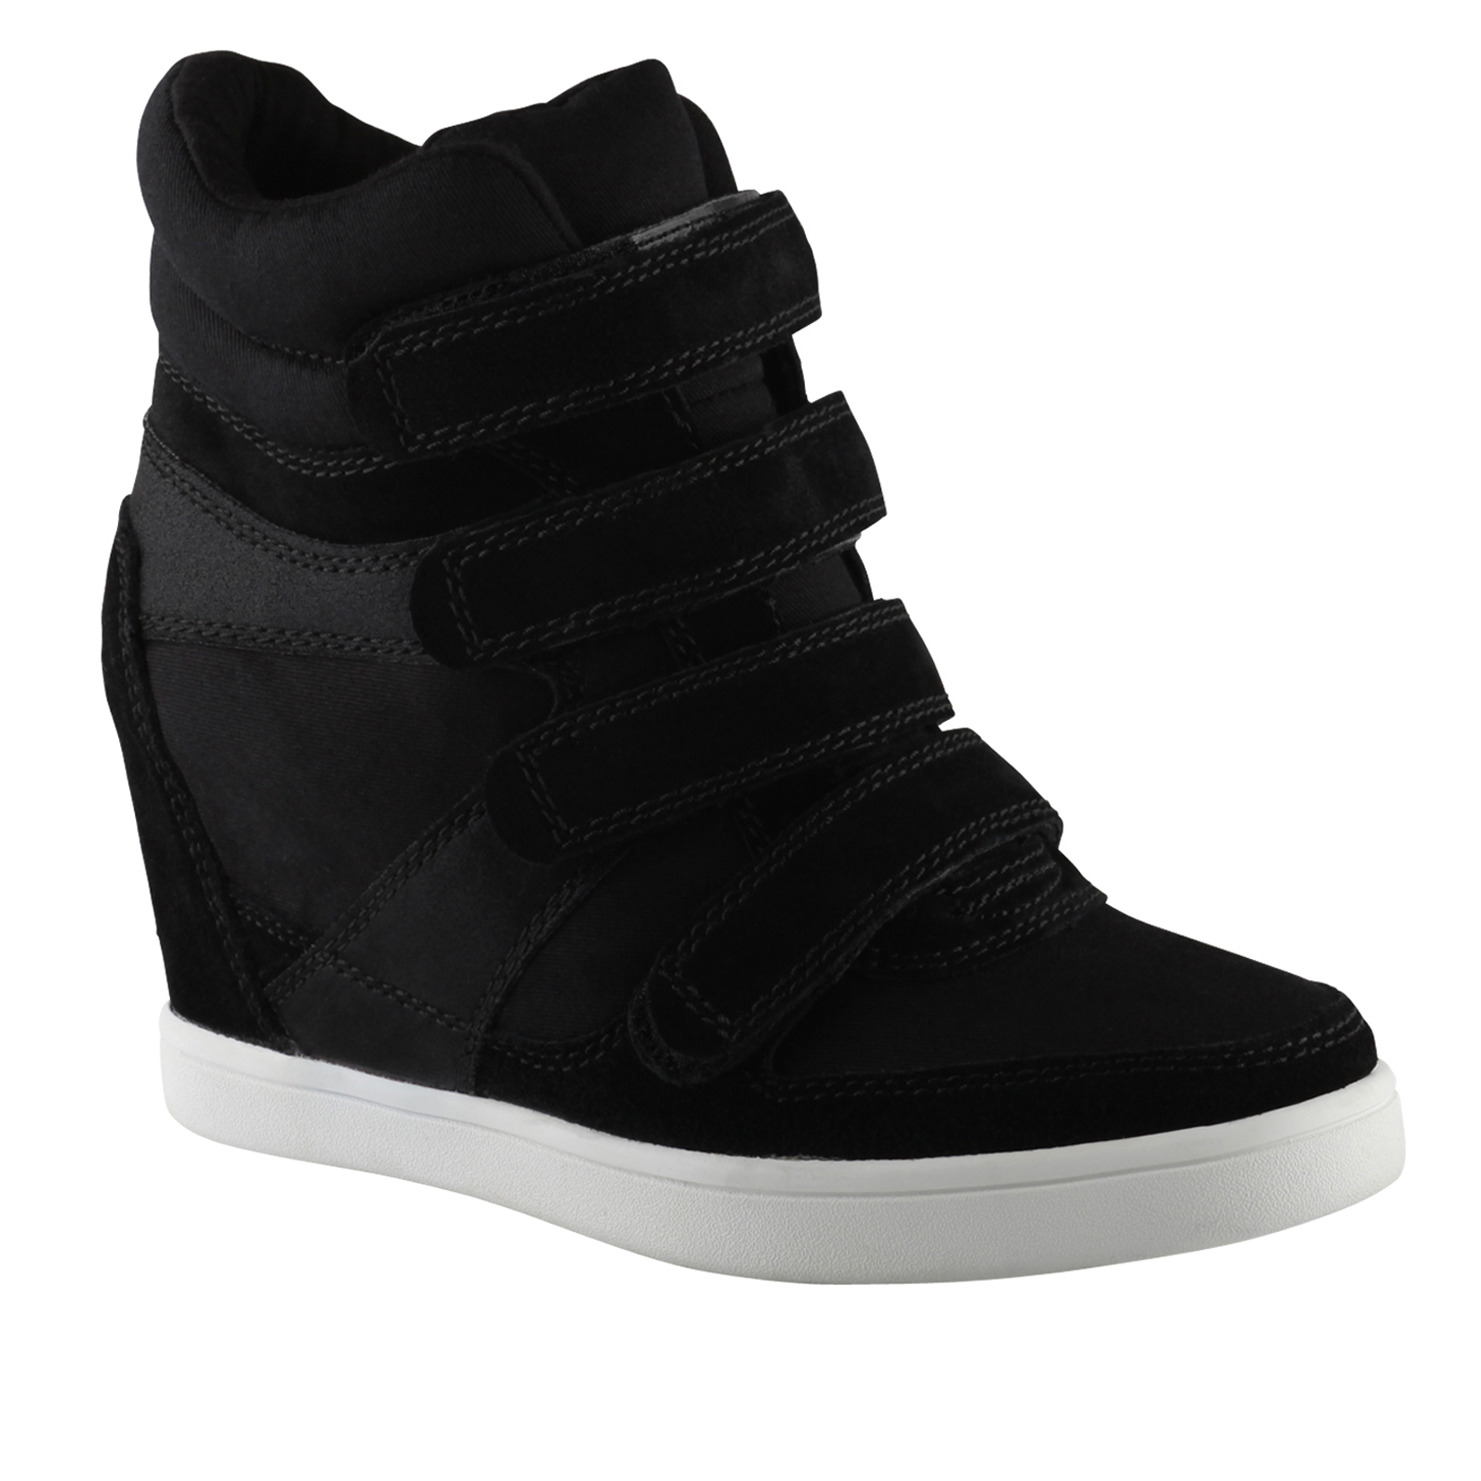 Chism Wedge Sneaker in Black Suede (above) and Camel (below), 80.00